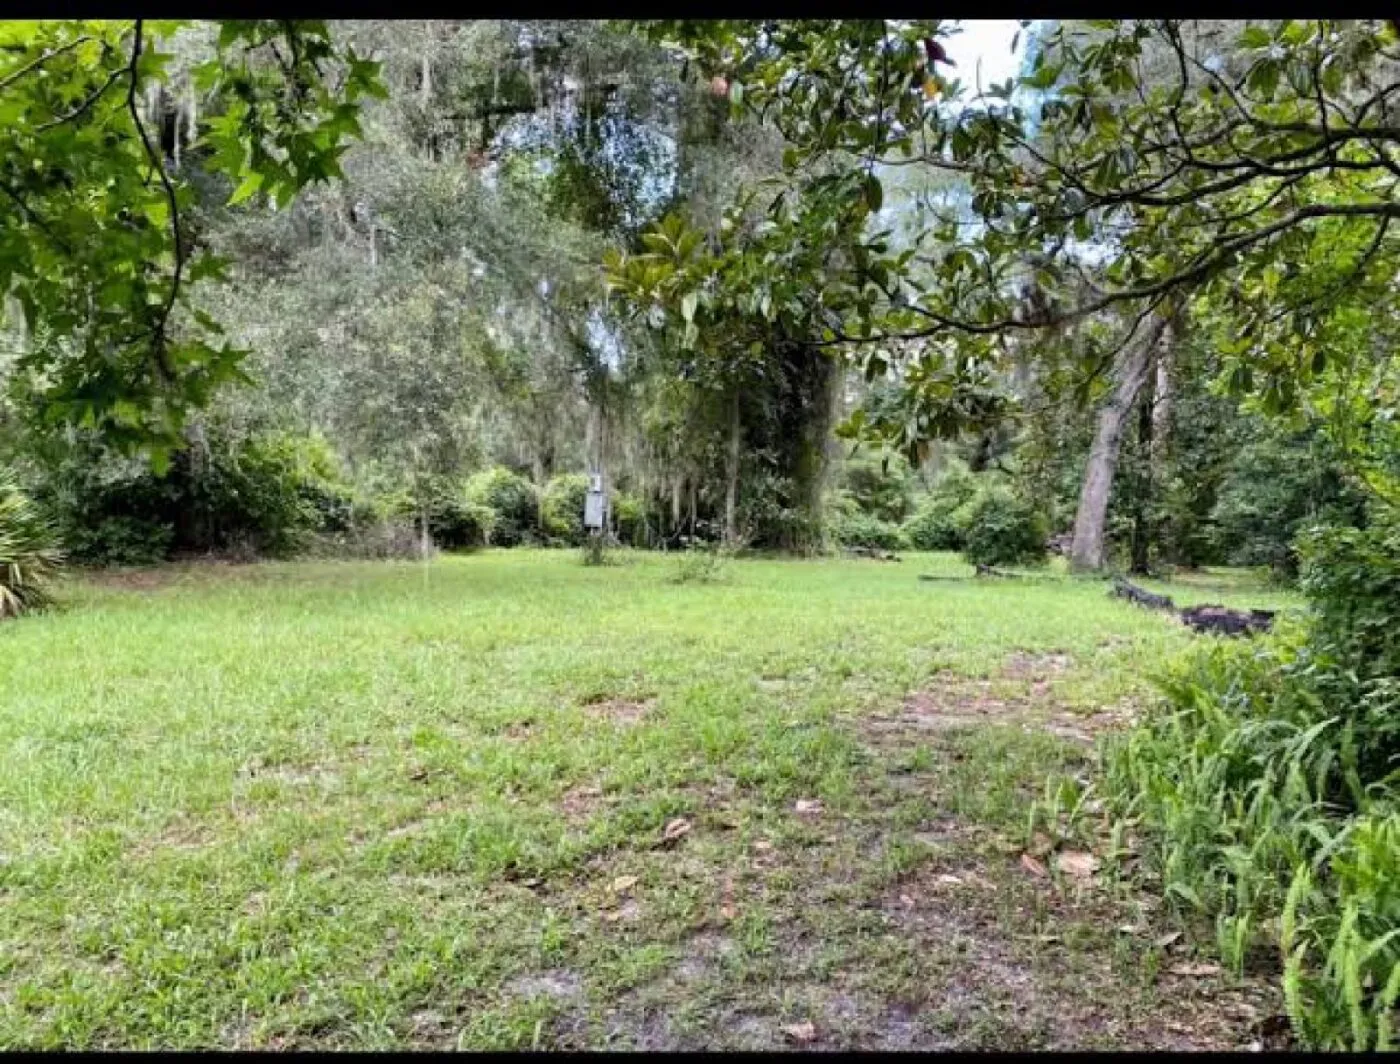 Land For Sale Real Estate-Land for sale in Karen Hardy 1/2 Acre @30M Ready Title Deed QUICK SALE Exclusive half acre 0.5🔥 6